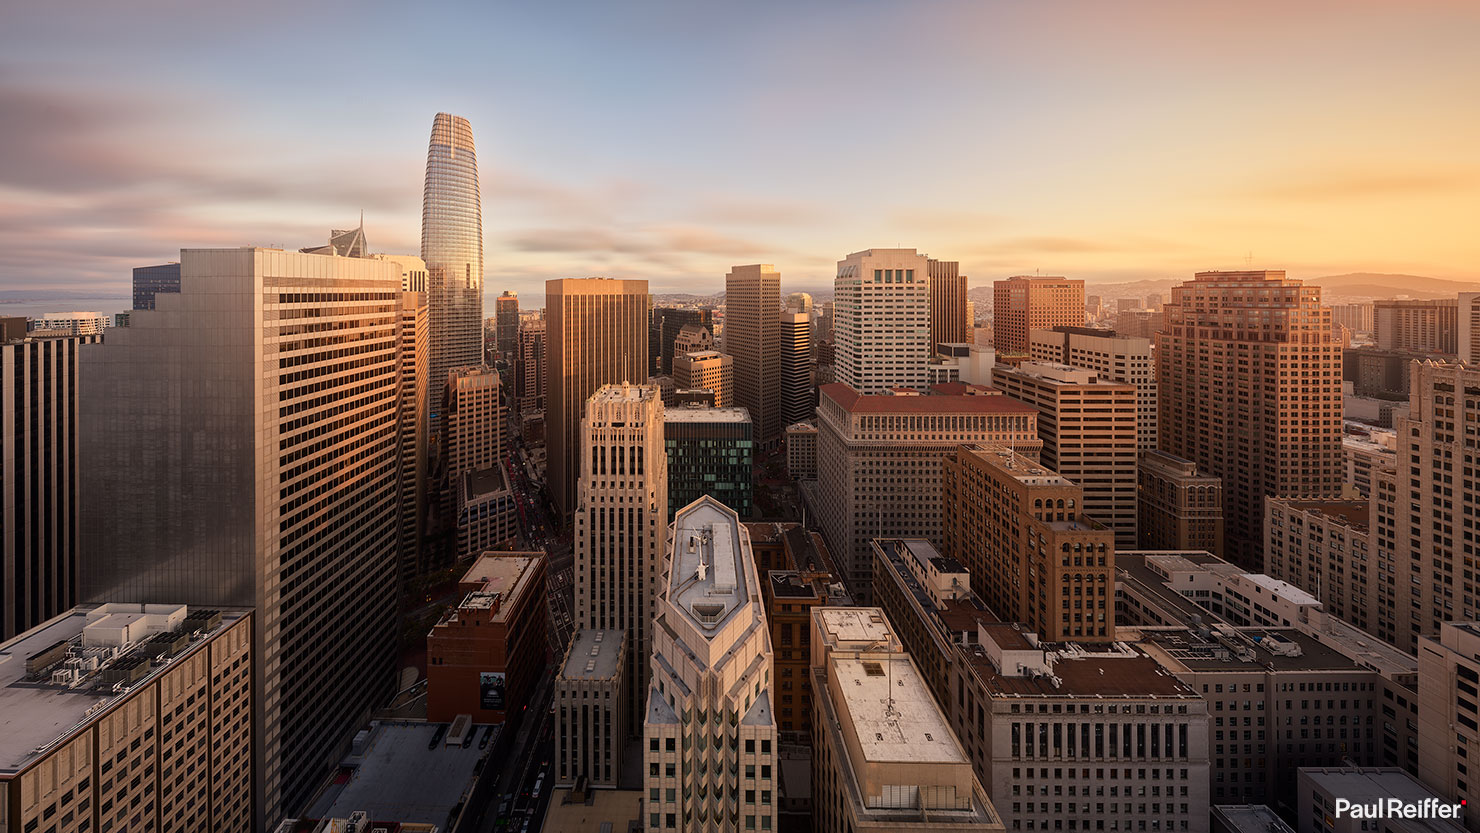 San Francisco Sales Force Tower SoMa Downtown Panoramic View Market Street Embarcadero View Paul Reiffer California Cityscape Photographer Golden Hour Scene